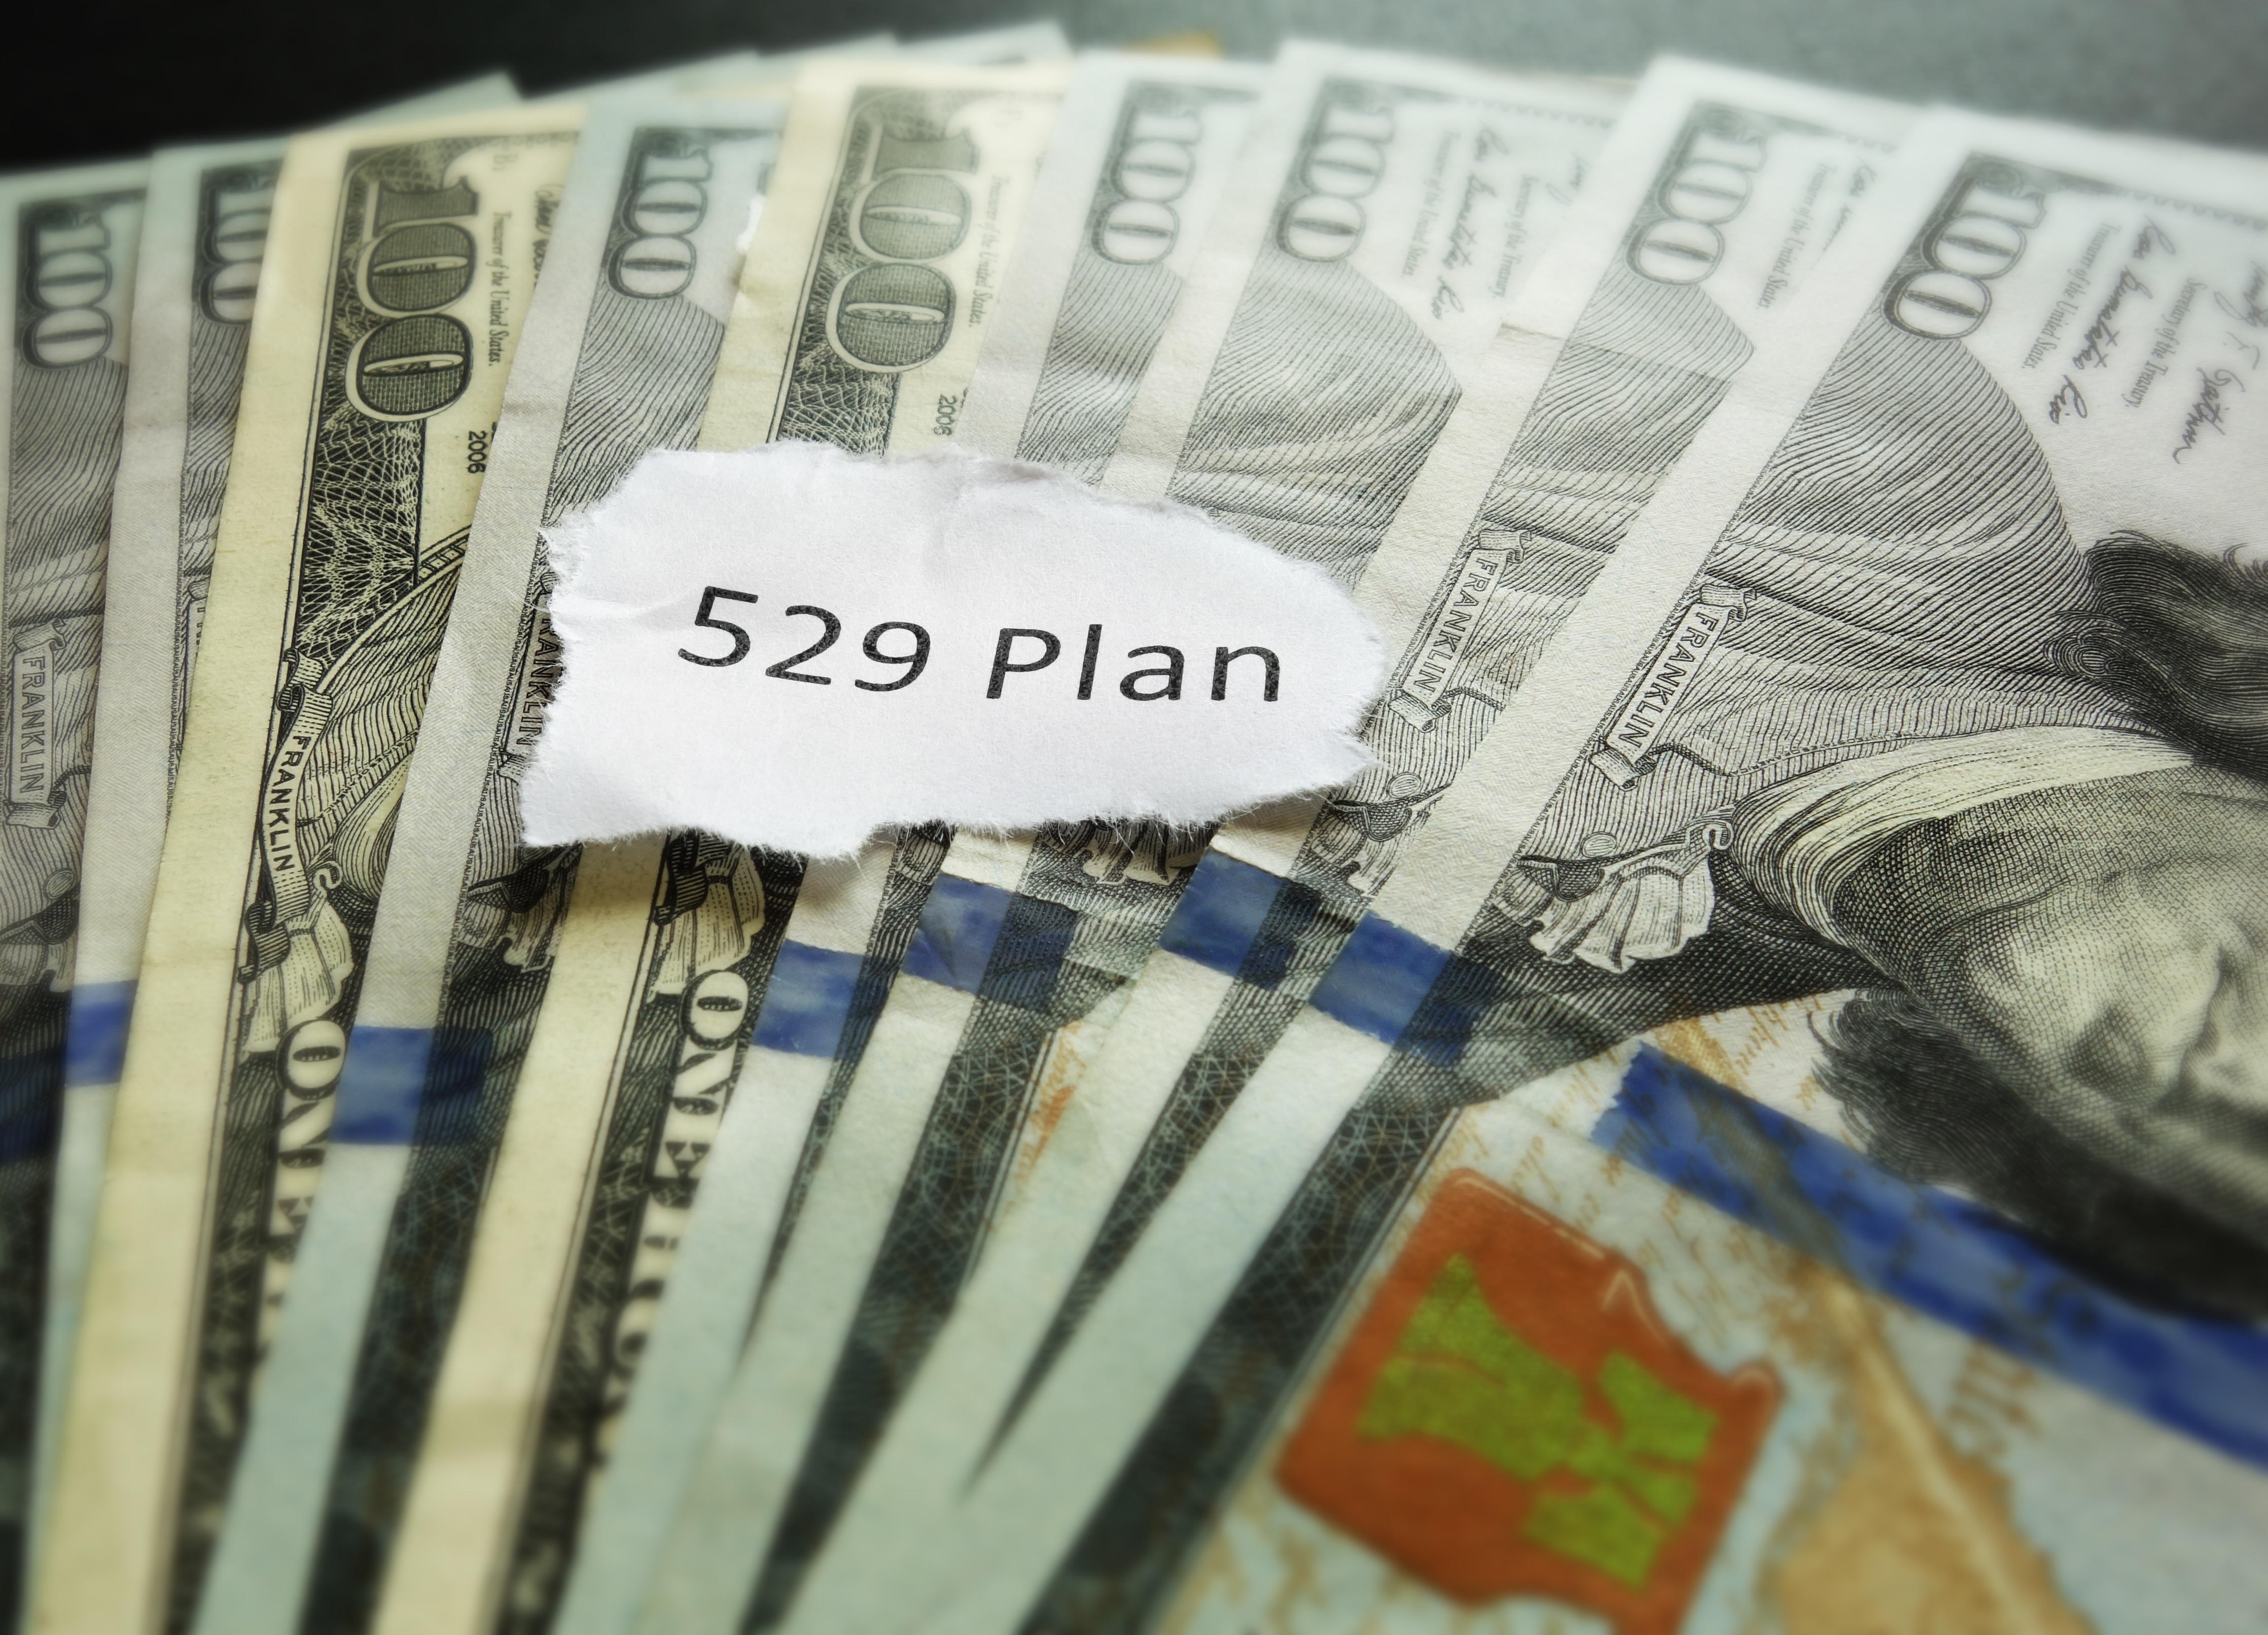 7 things to know about 529 plans